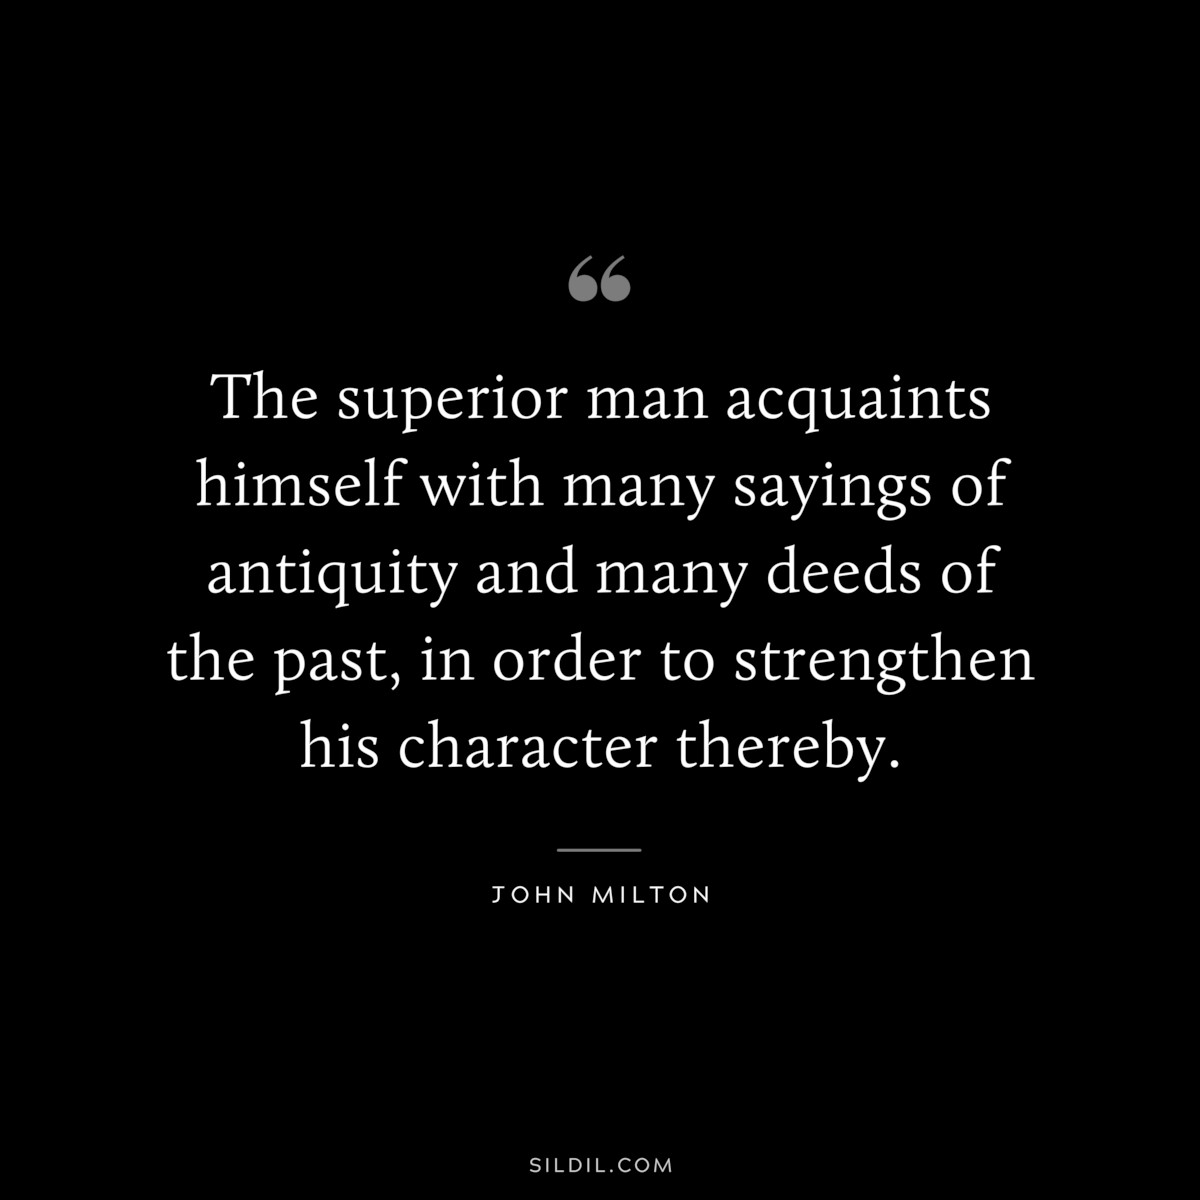 The superior man acquaints himself with many sayings of antiquity and many deeds of the past, in order to strengthen his character thereby. ― John Milton